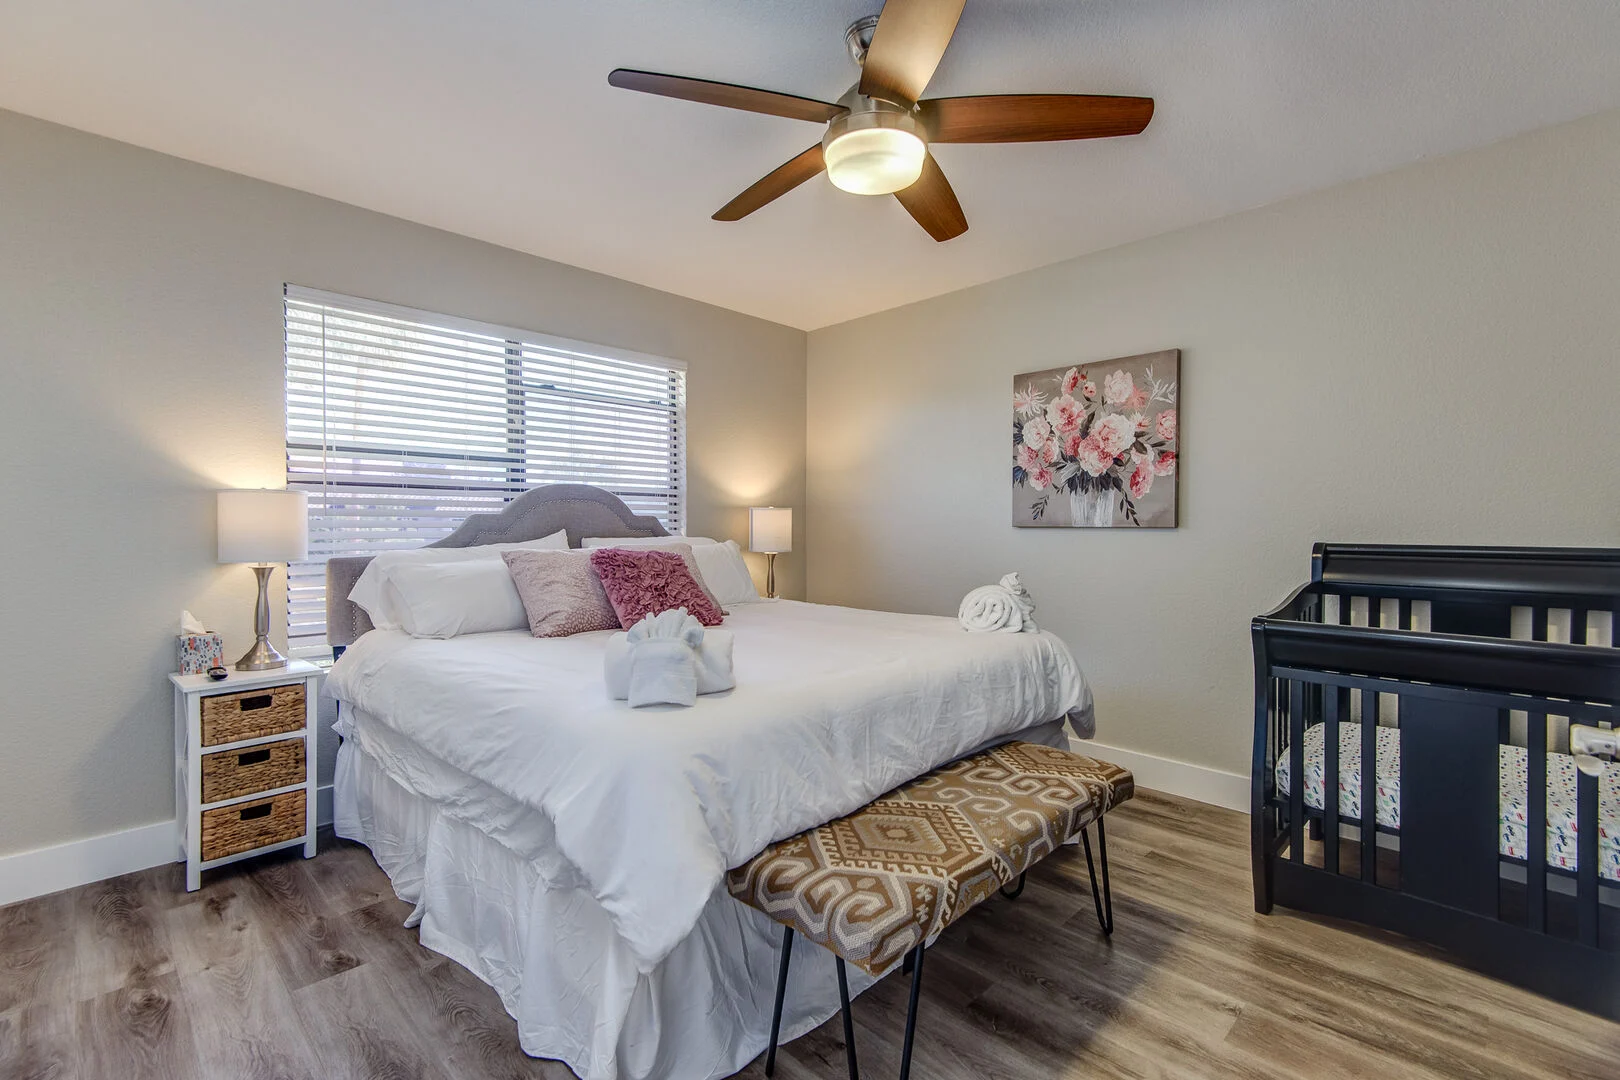 Enjoy a full family vacation in our VRBO Scottsdale rentals.